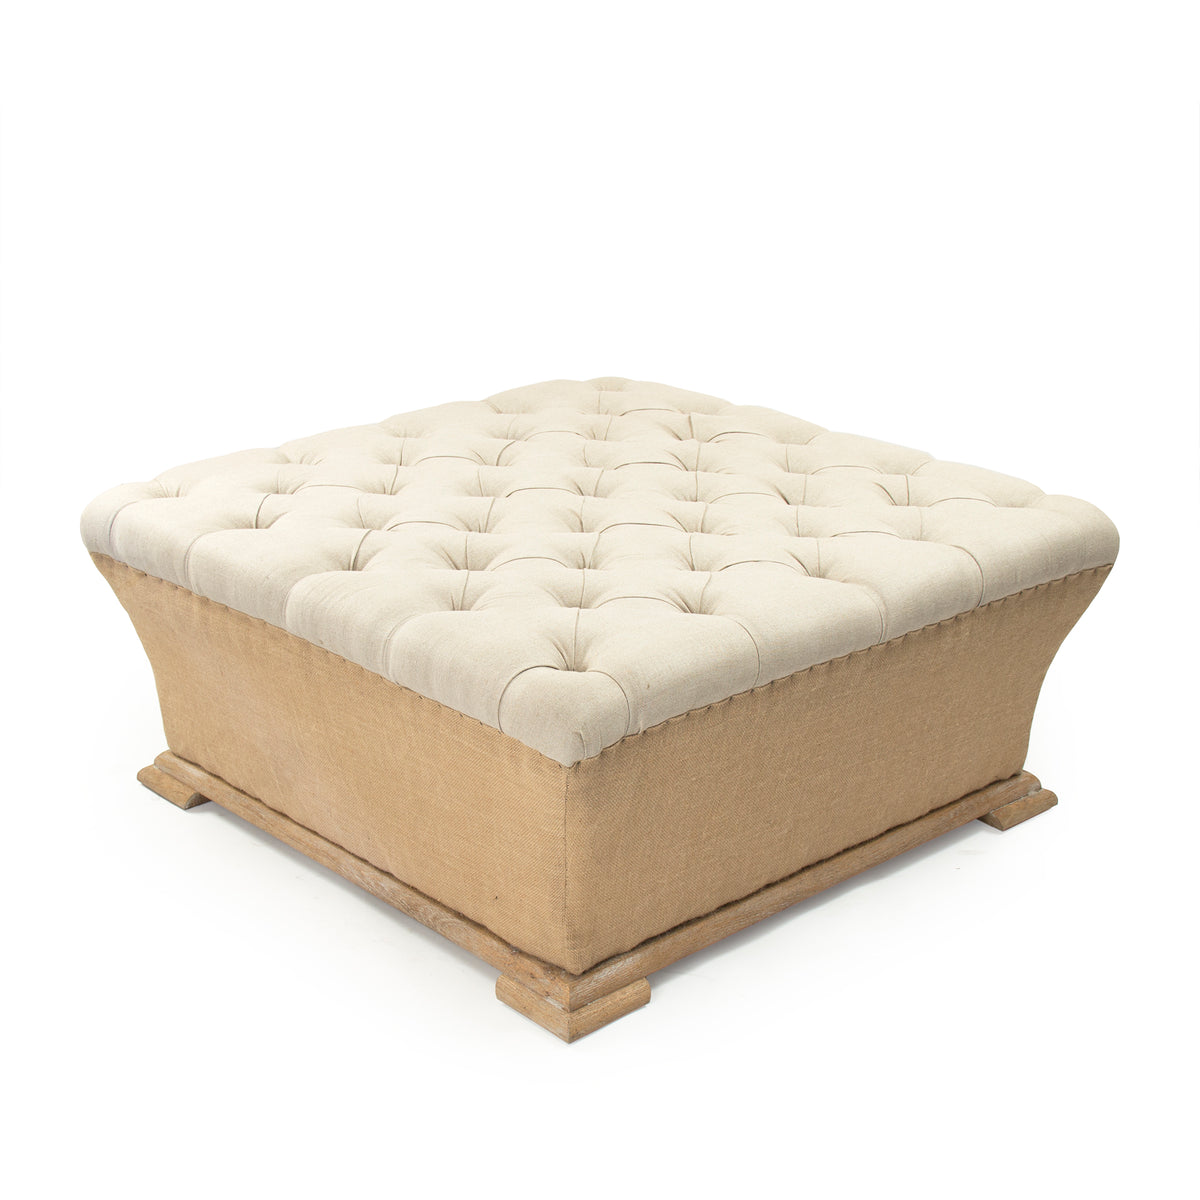 Quincy Ottoman by Zentique